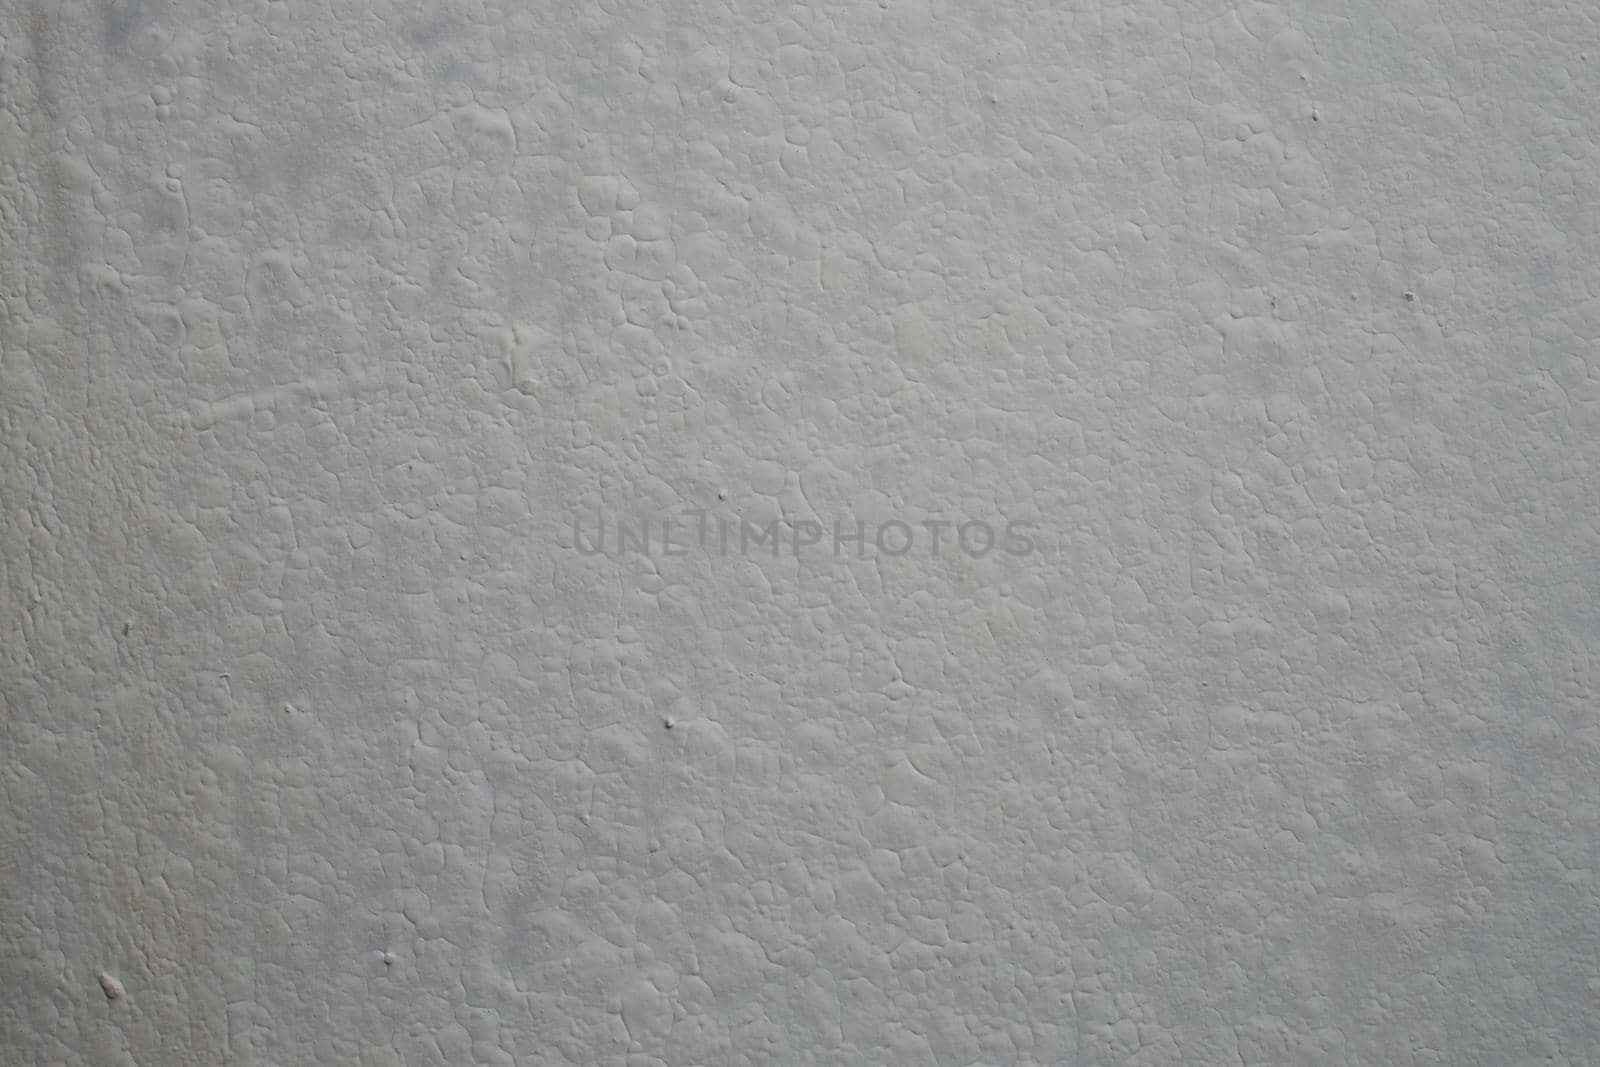 shabby matte white paint with cracks - flat close-up full frame textured background